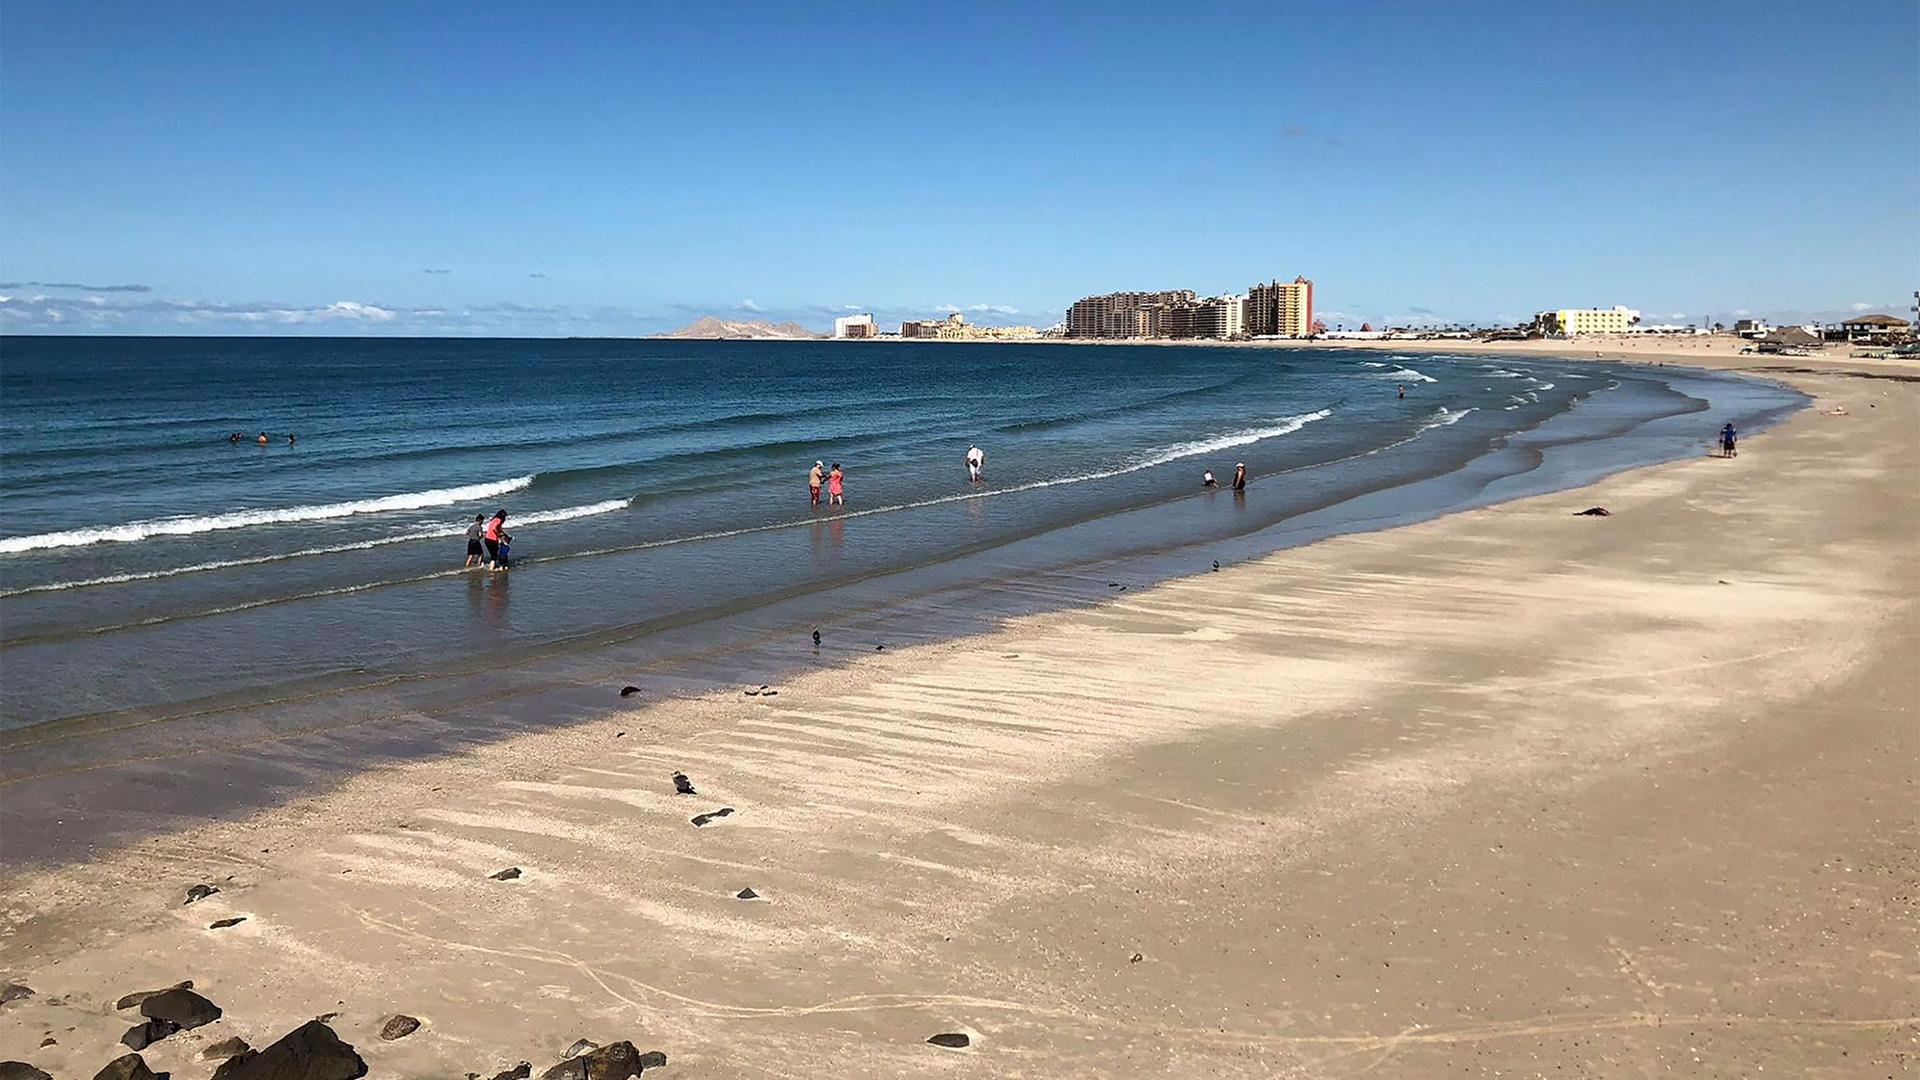 The beach at the popular tourist resort of Puerto Peñasco in the state of Sonora, Mexico, September 2018.